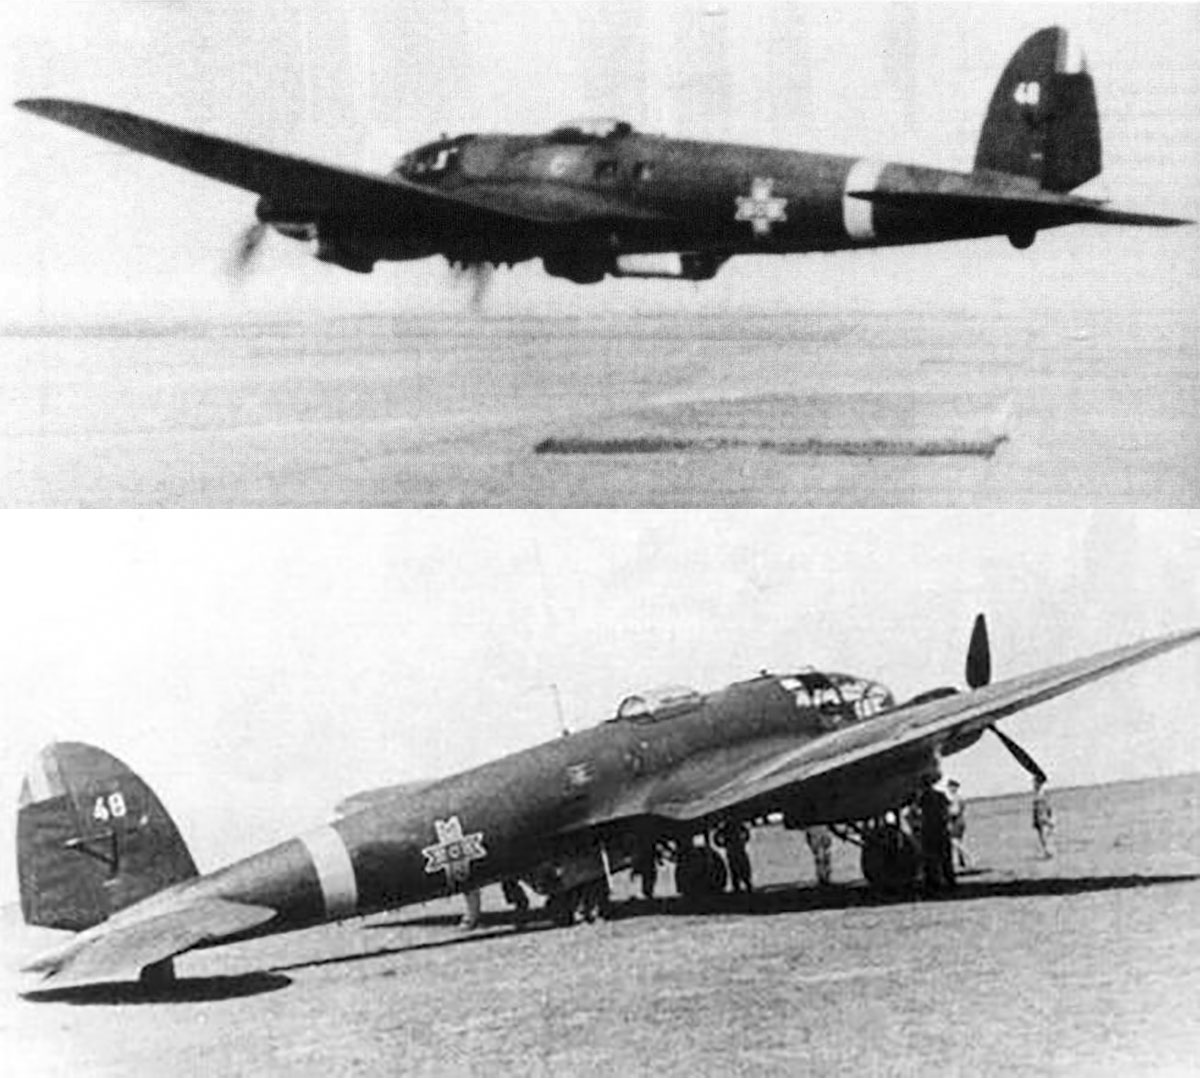 Heinkel He 111H6 RRAF White 48 was also capable of carrying torpedos 01